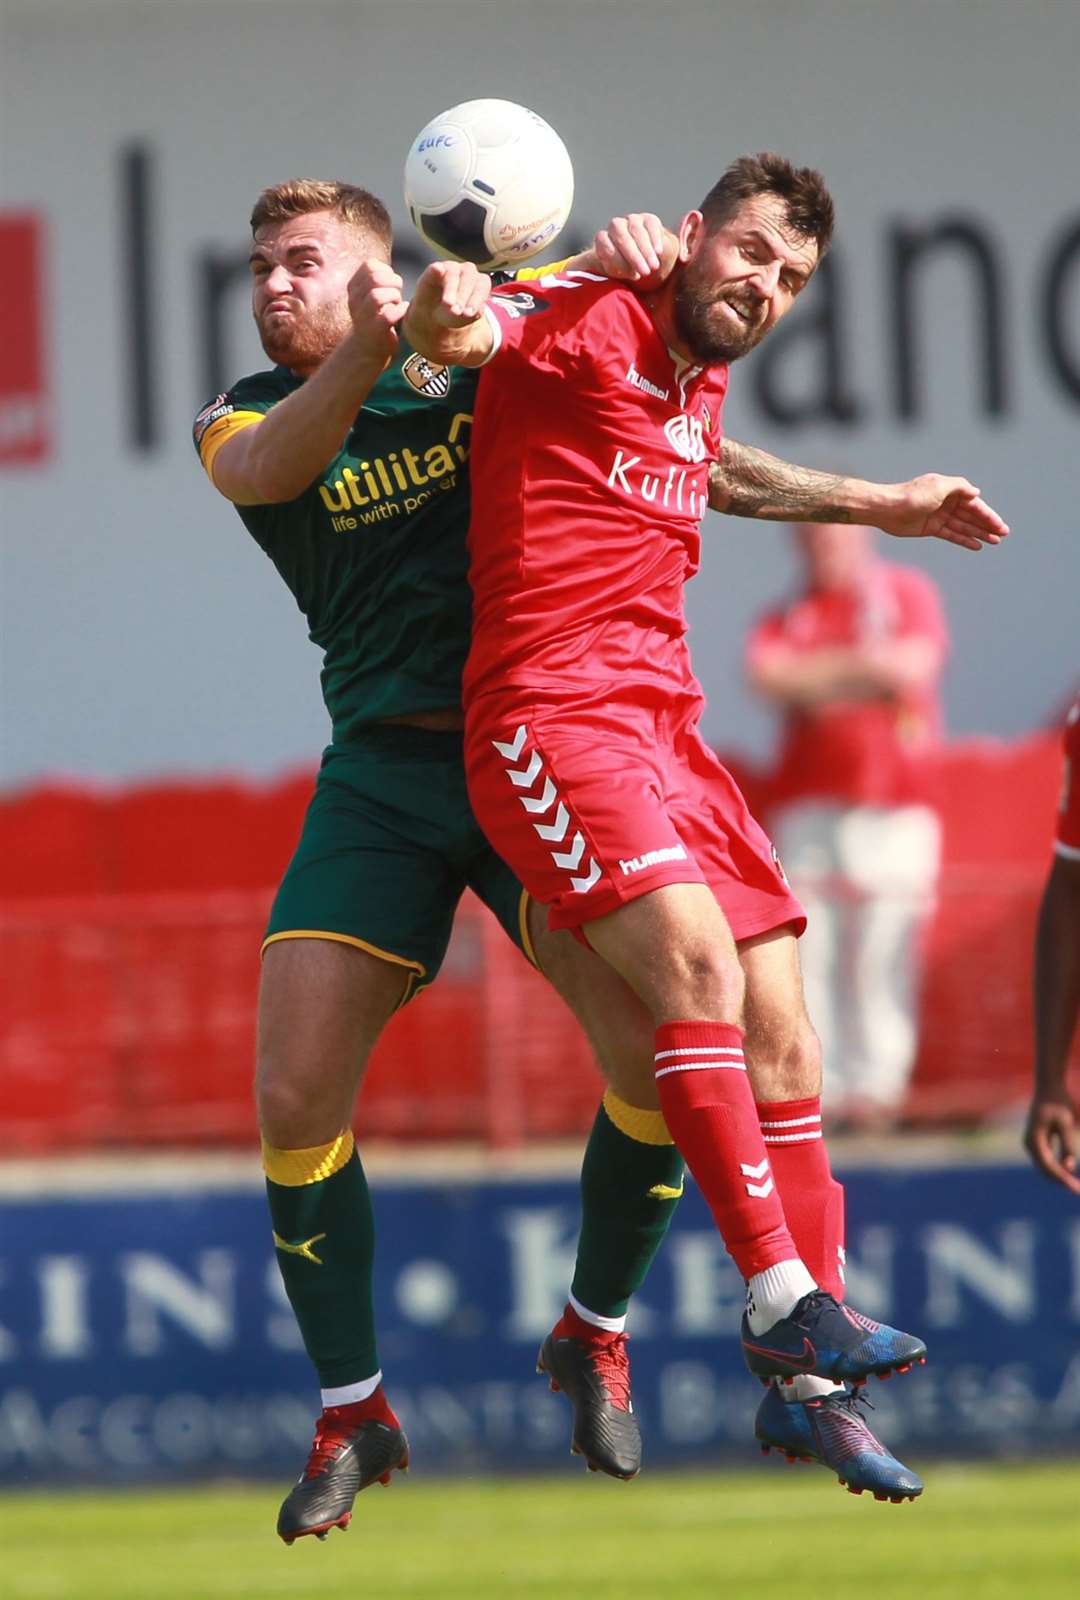 Regan Booty in action for Notts County at Ebbsfleet in the 2019/20 season. Picture: John Westhrop